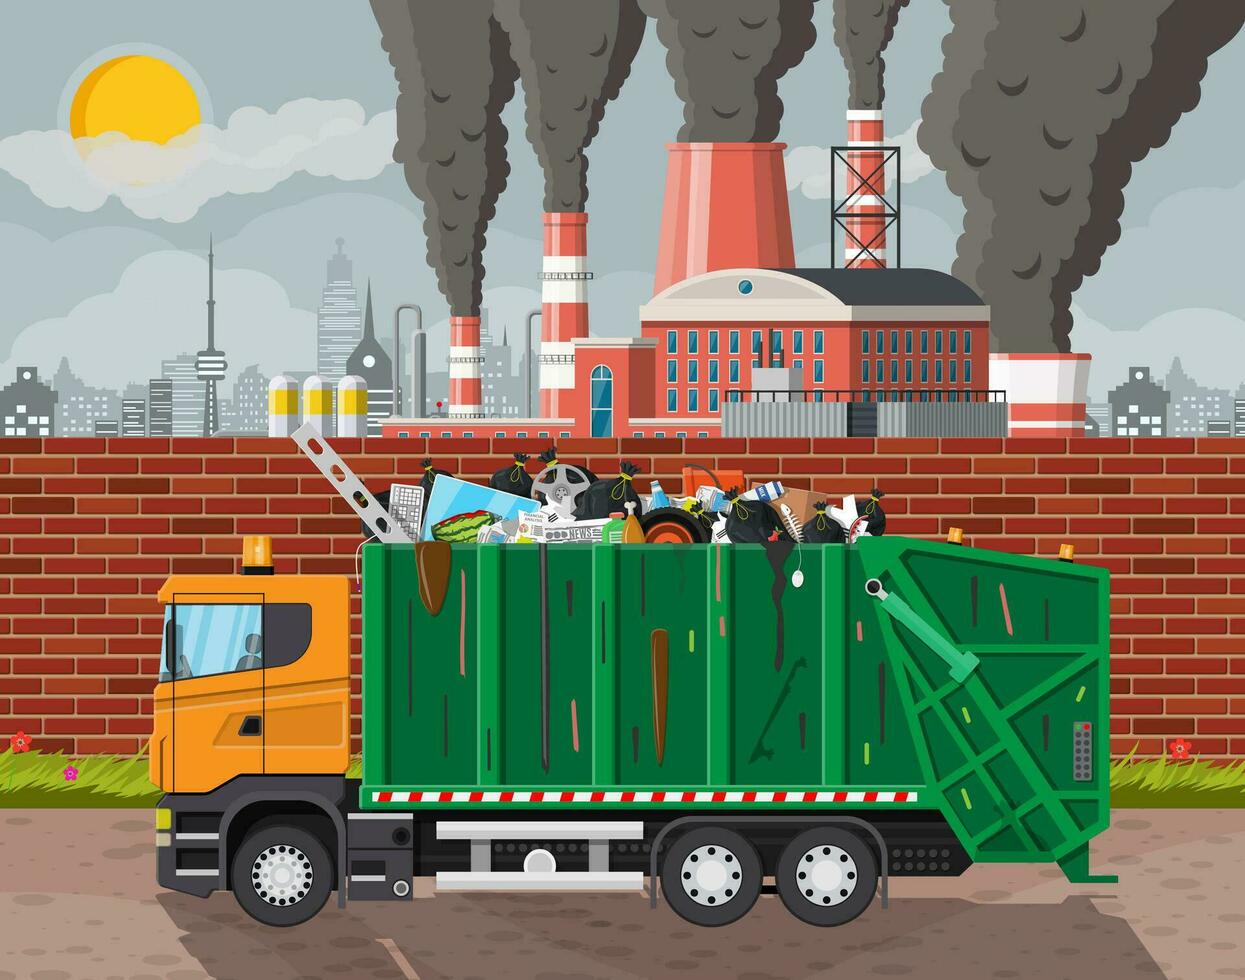 Plant smoking pipes. Smog in city. Trash emission from factory. Grey sky polluted trees grass. Garbage truck full of trash. Environmental pollution ecology nature. Vector illustration flat style